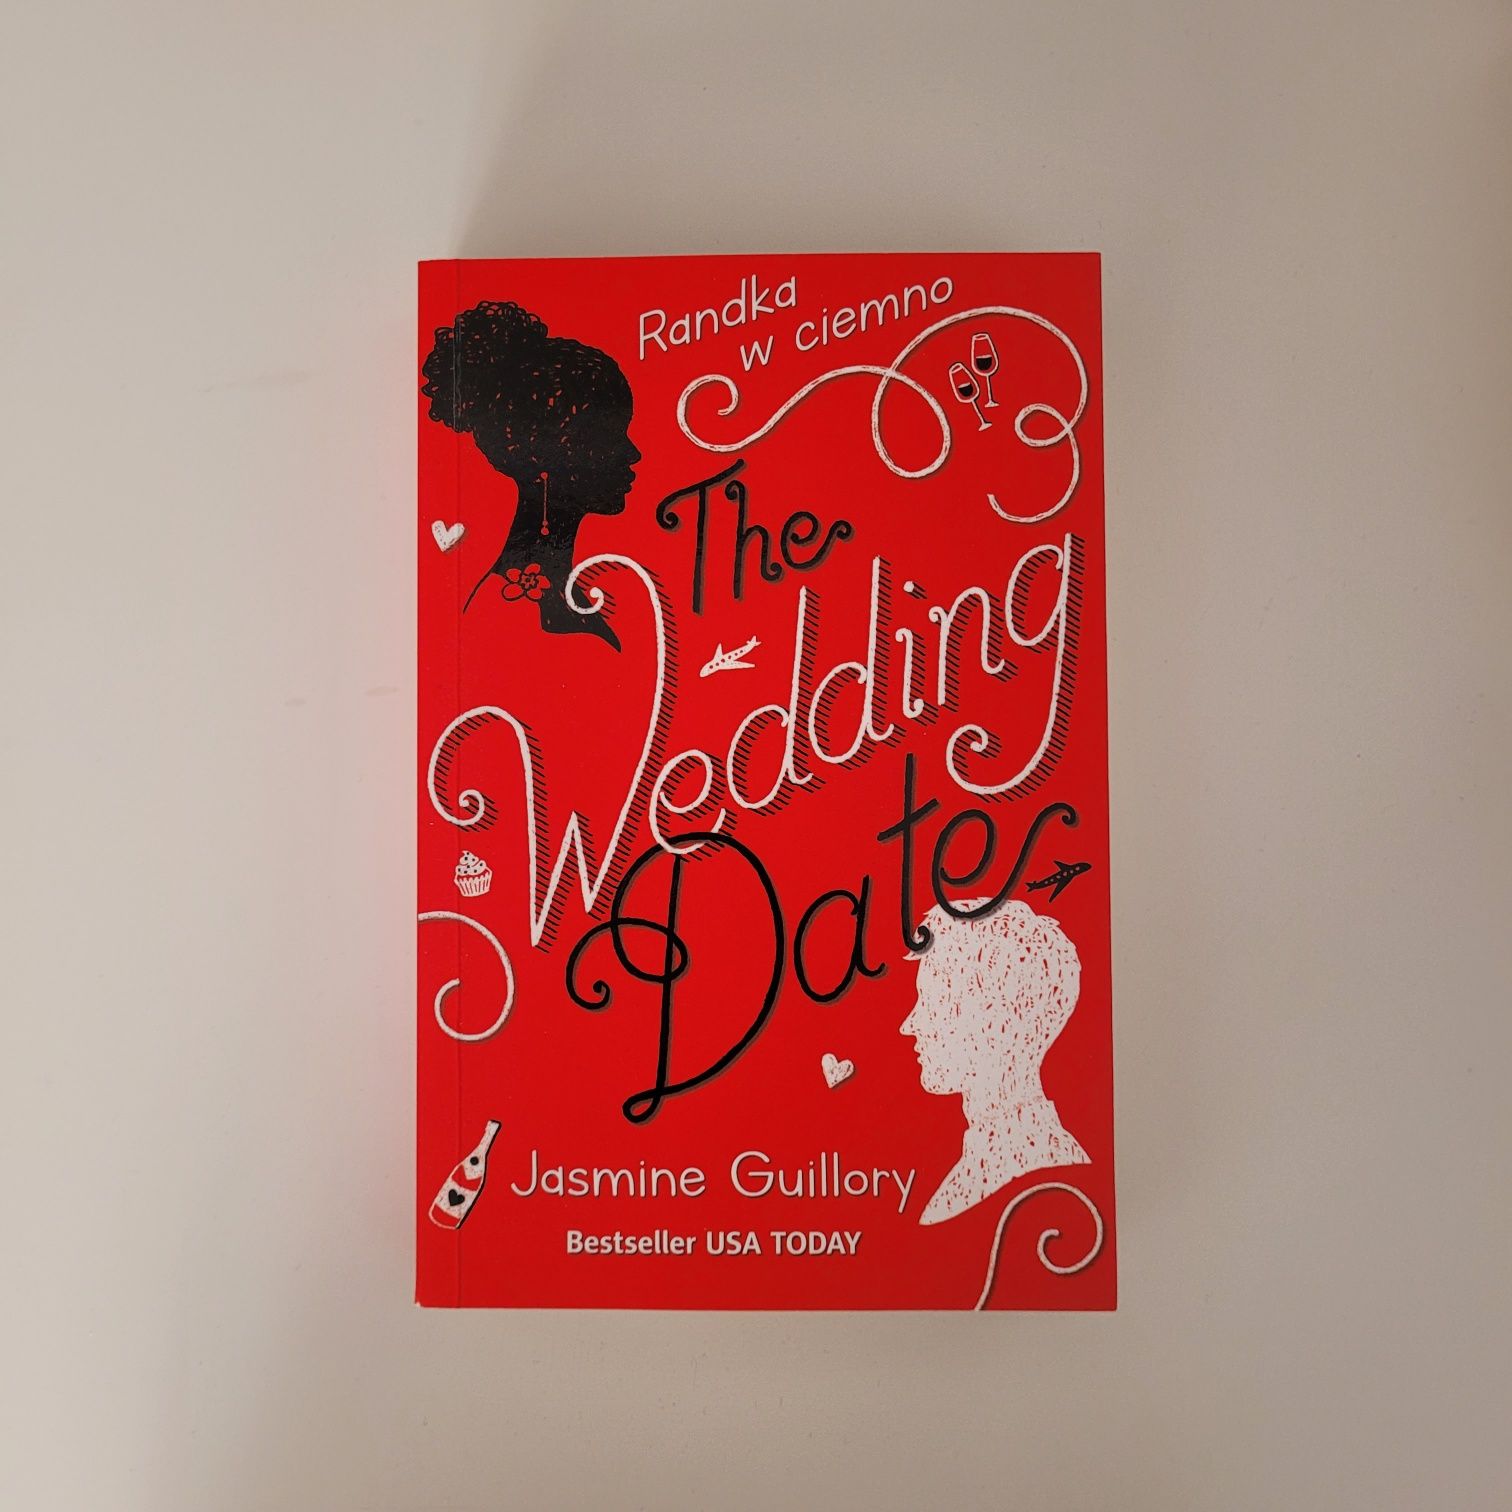 Jasmine Guillory - The Wedding Date